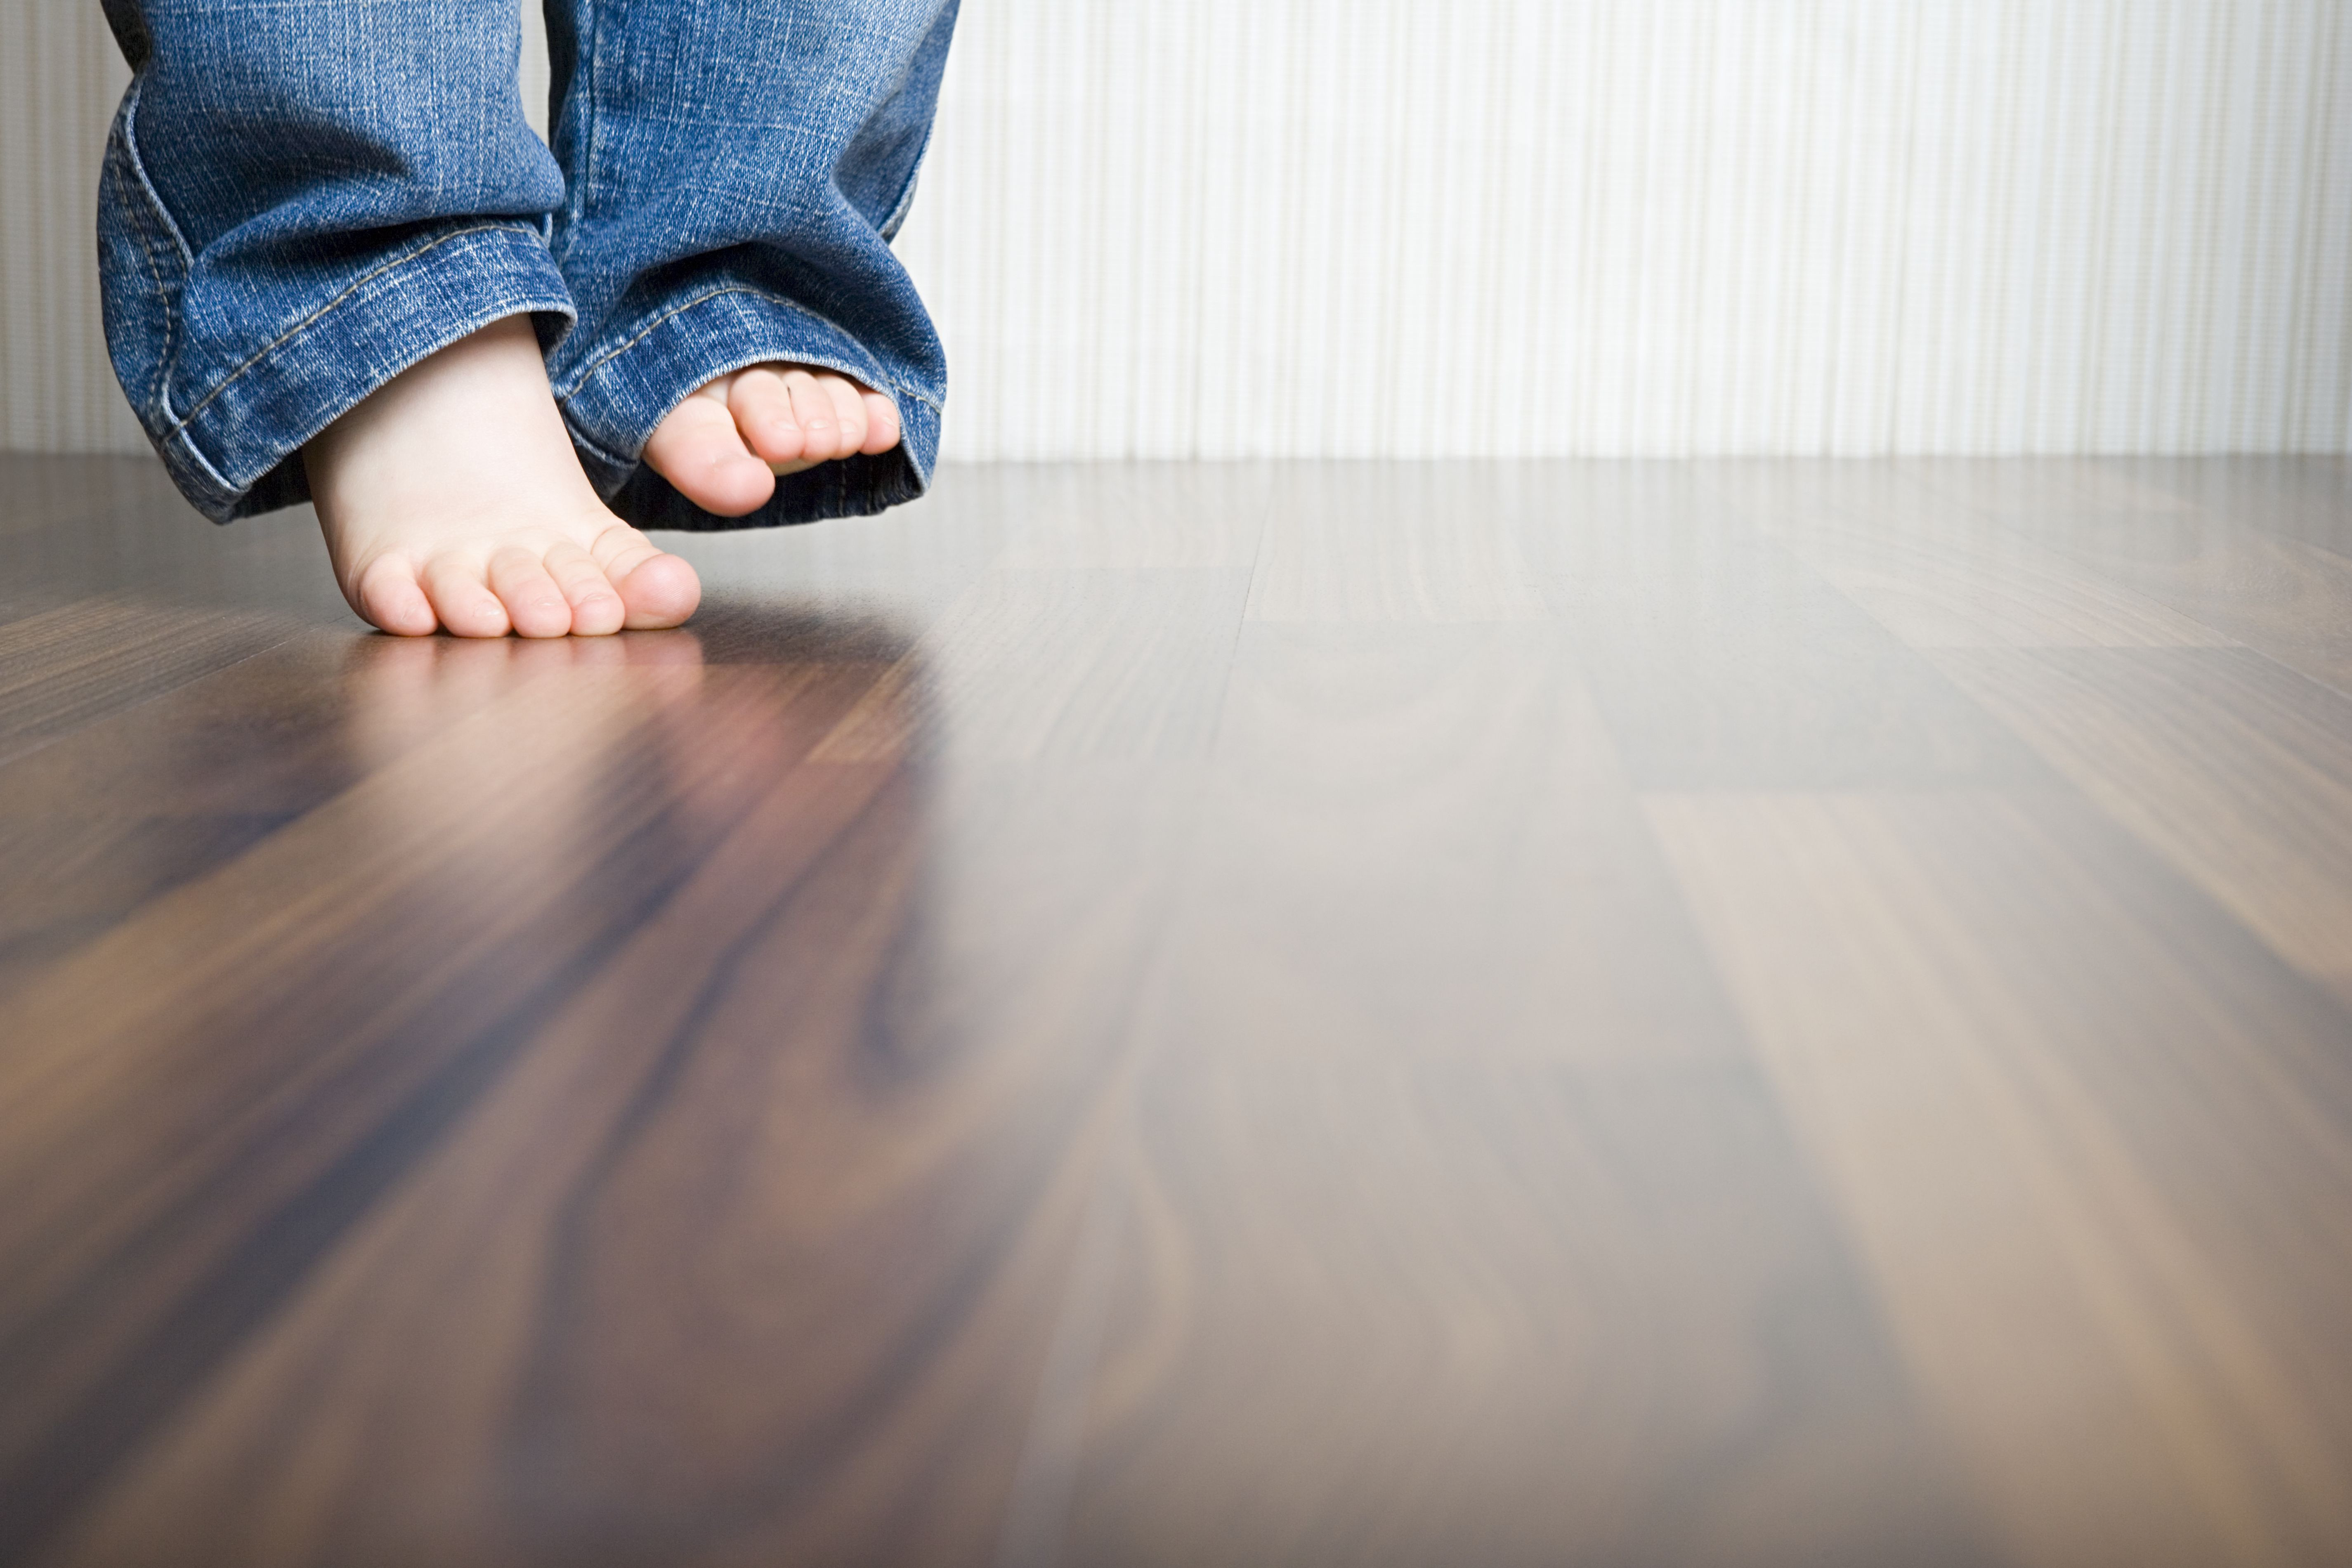 how much to refinish hardwood floors yourself of how to clean hardwood floors best way to clean wood flooring in 1512149908 gettyimages 75403973